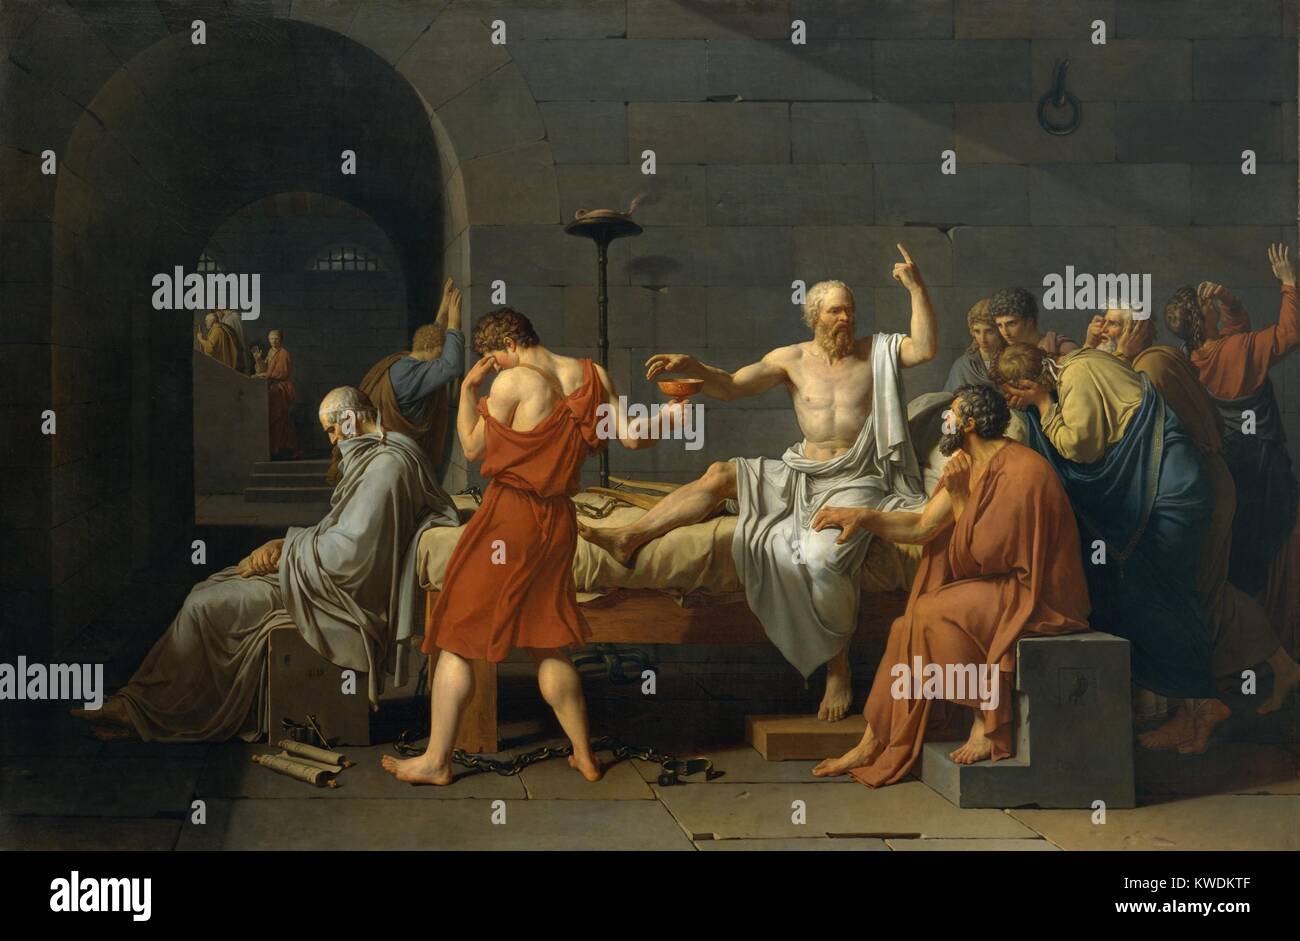 THE DEATH OF SOCRATES, by Jacques Louis David, 1787, French Neoclassical painting, oil on canvas. Greek Classical philosopher Socrates about to drink poison hemlock as the price of maintaining his beliefs. Most of his disciples are grieving, except for the meditative Plato seated on left. Apollodorus, is behind Plato, leaning against the wall while Crito grasps Socratess thigh (BSLOC 2017 9 145) Stock Photo